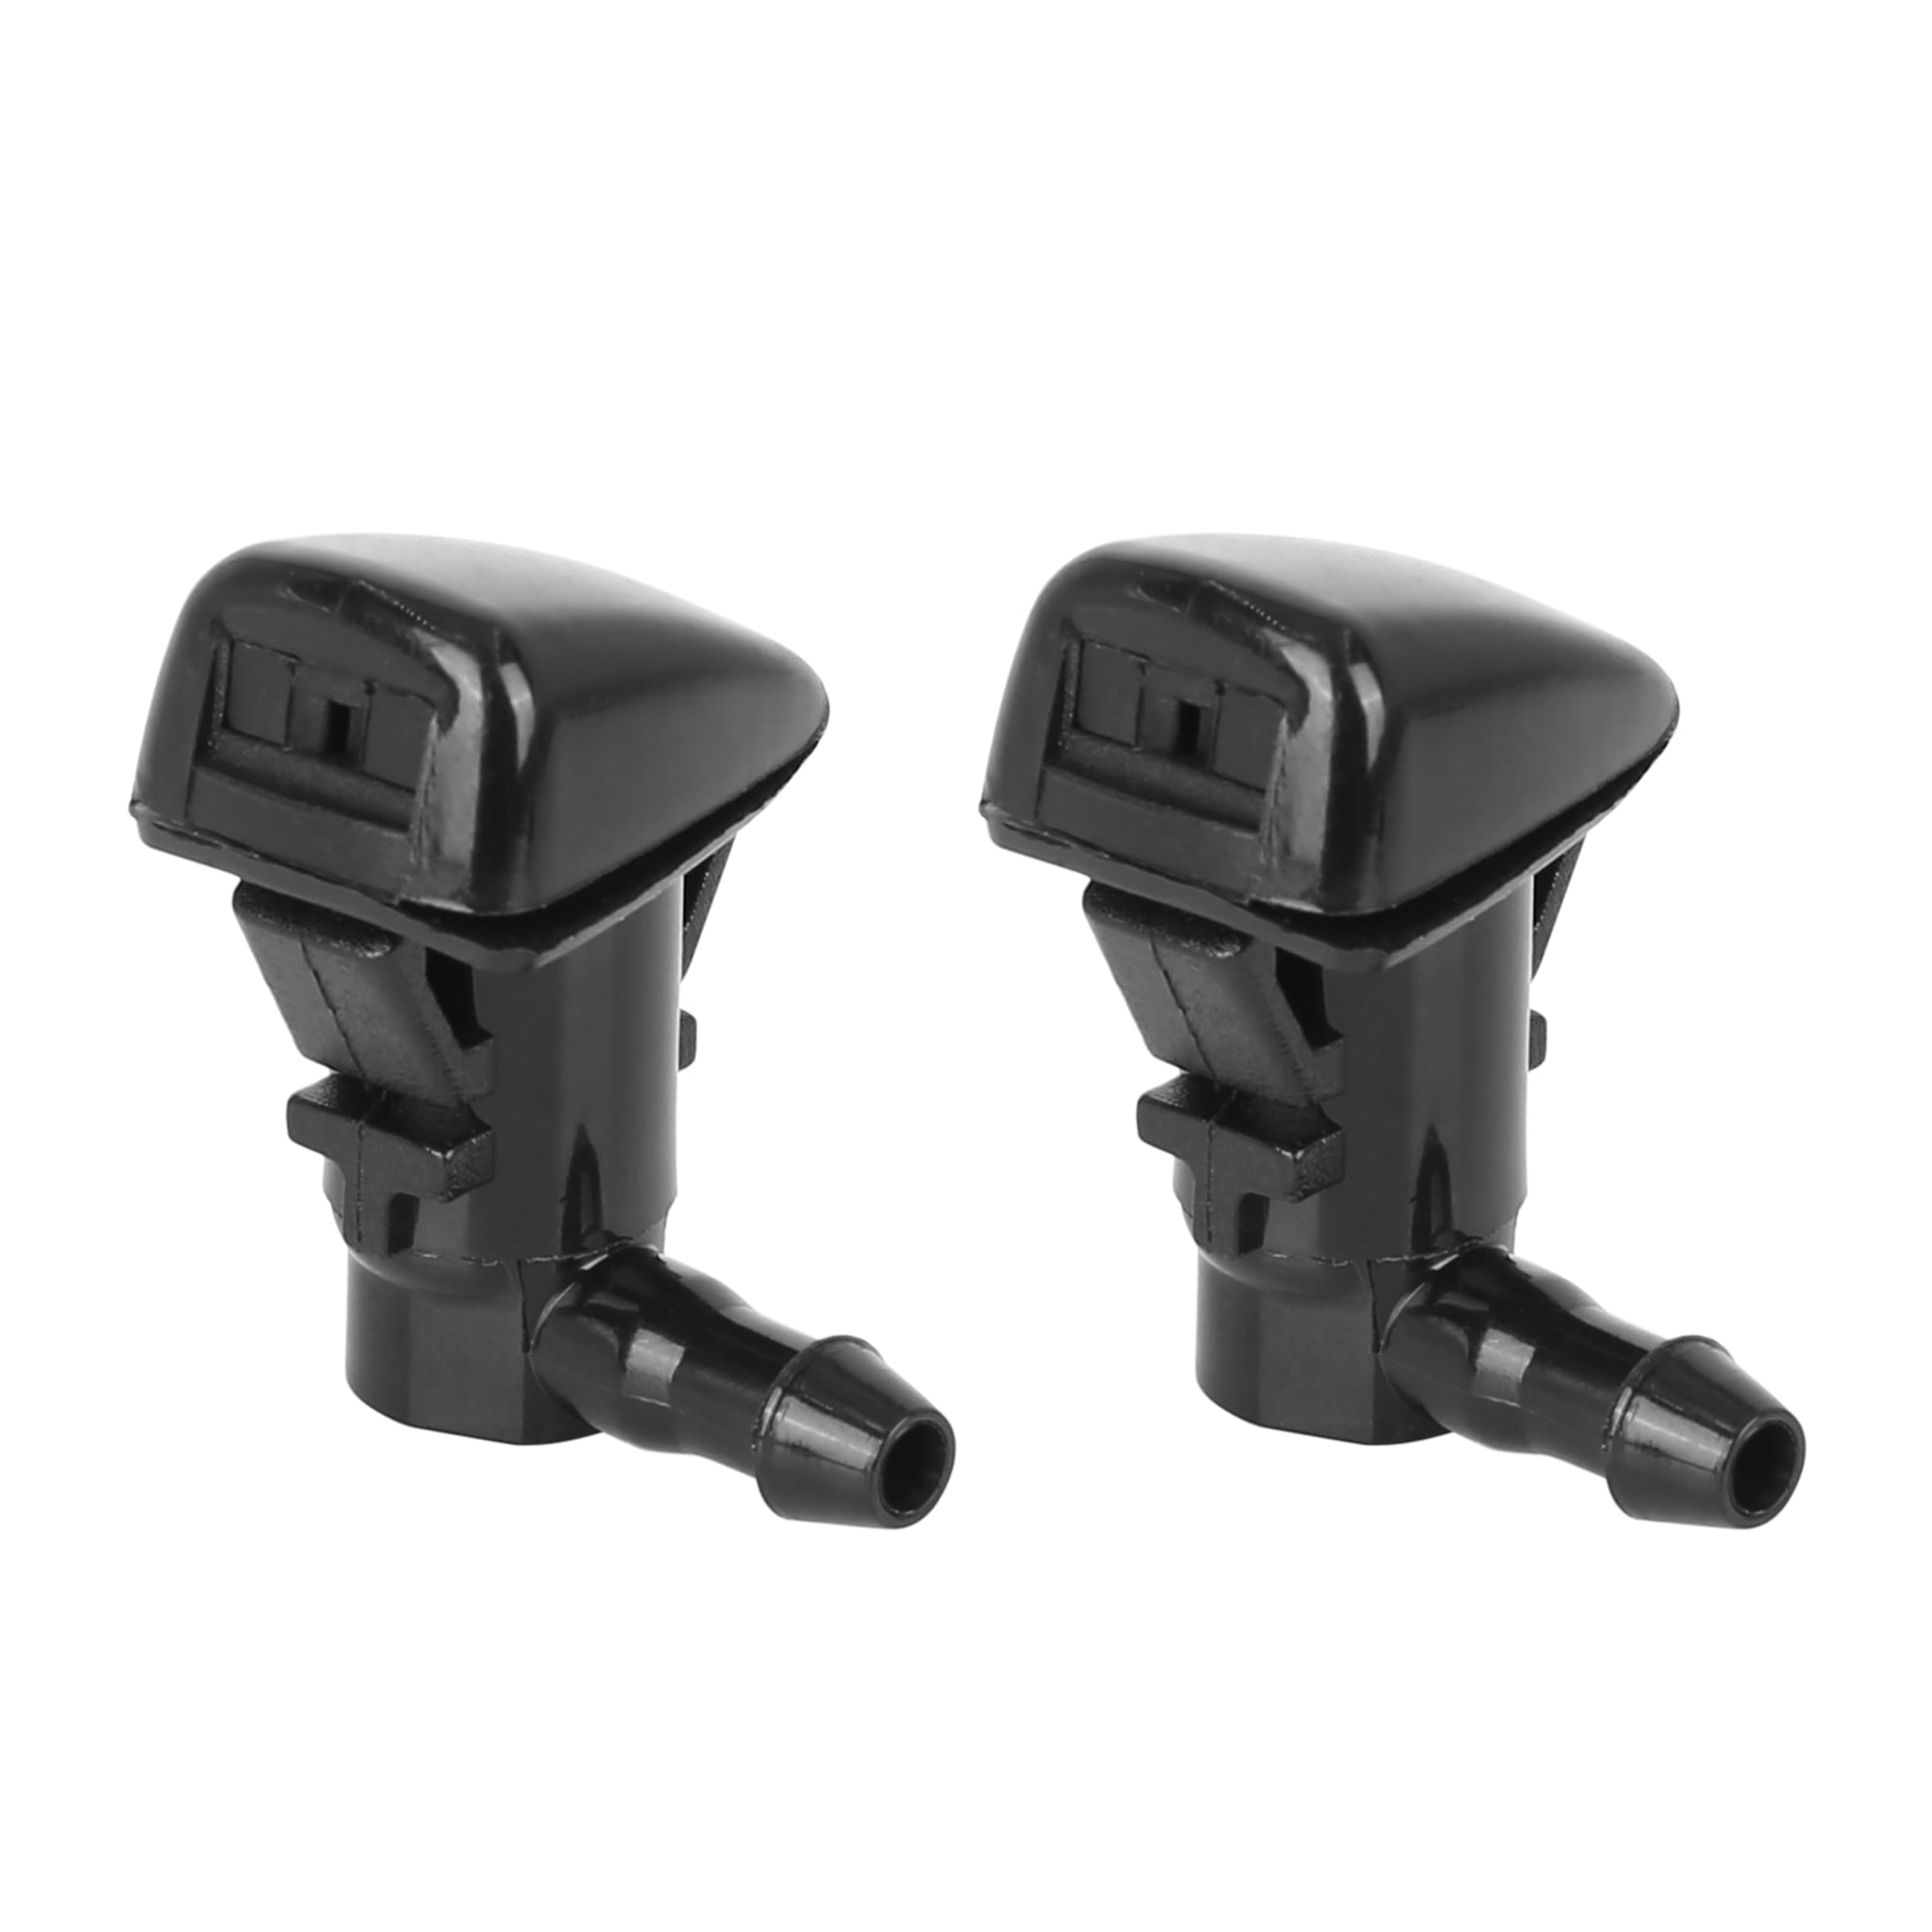 2pcs Front Windshield Washer Fluid Spray Jet Nozzle Kits For Ford Edge 2007-2010